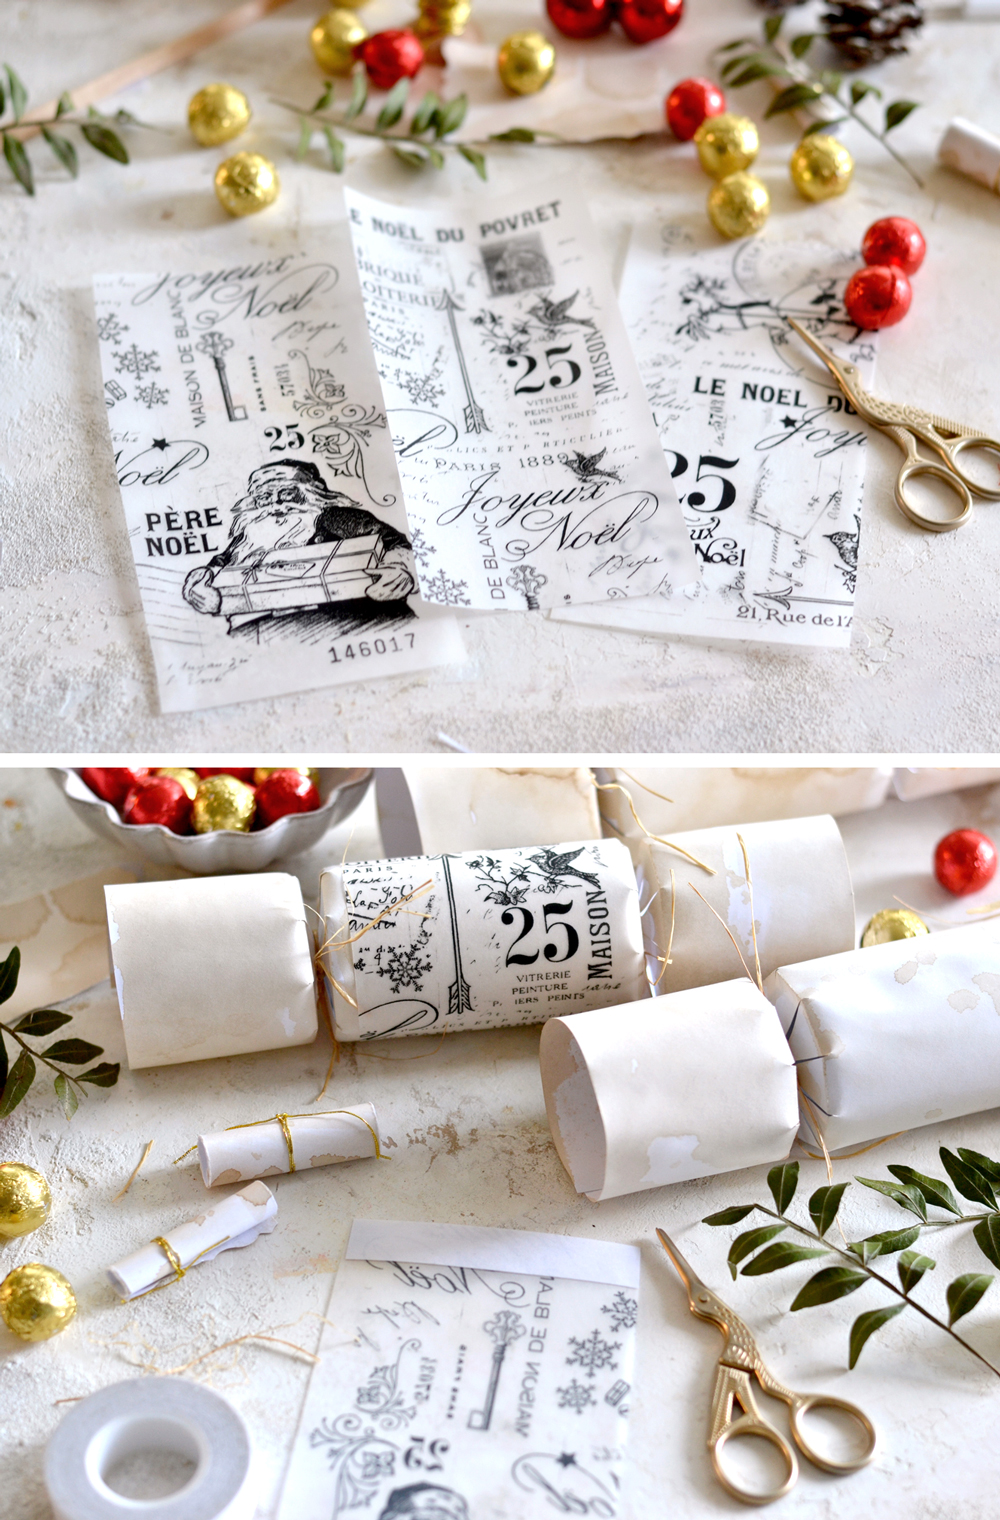 How to decorate the crackers using Christmas collage paper 